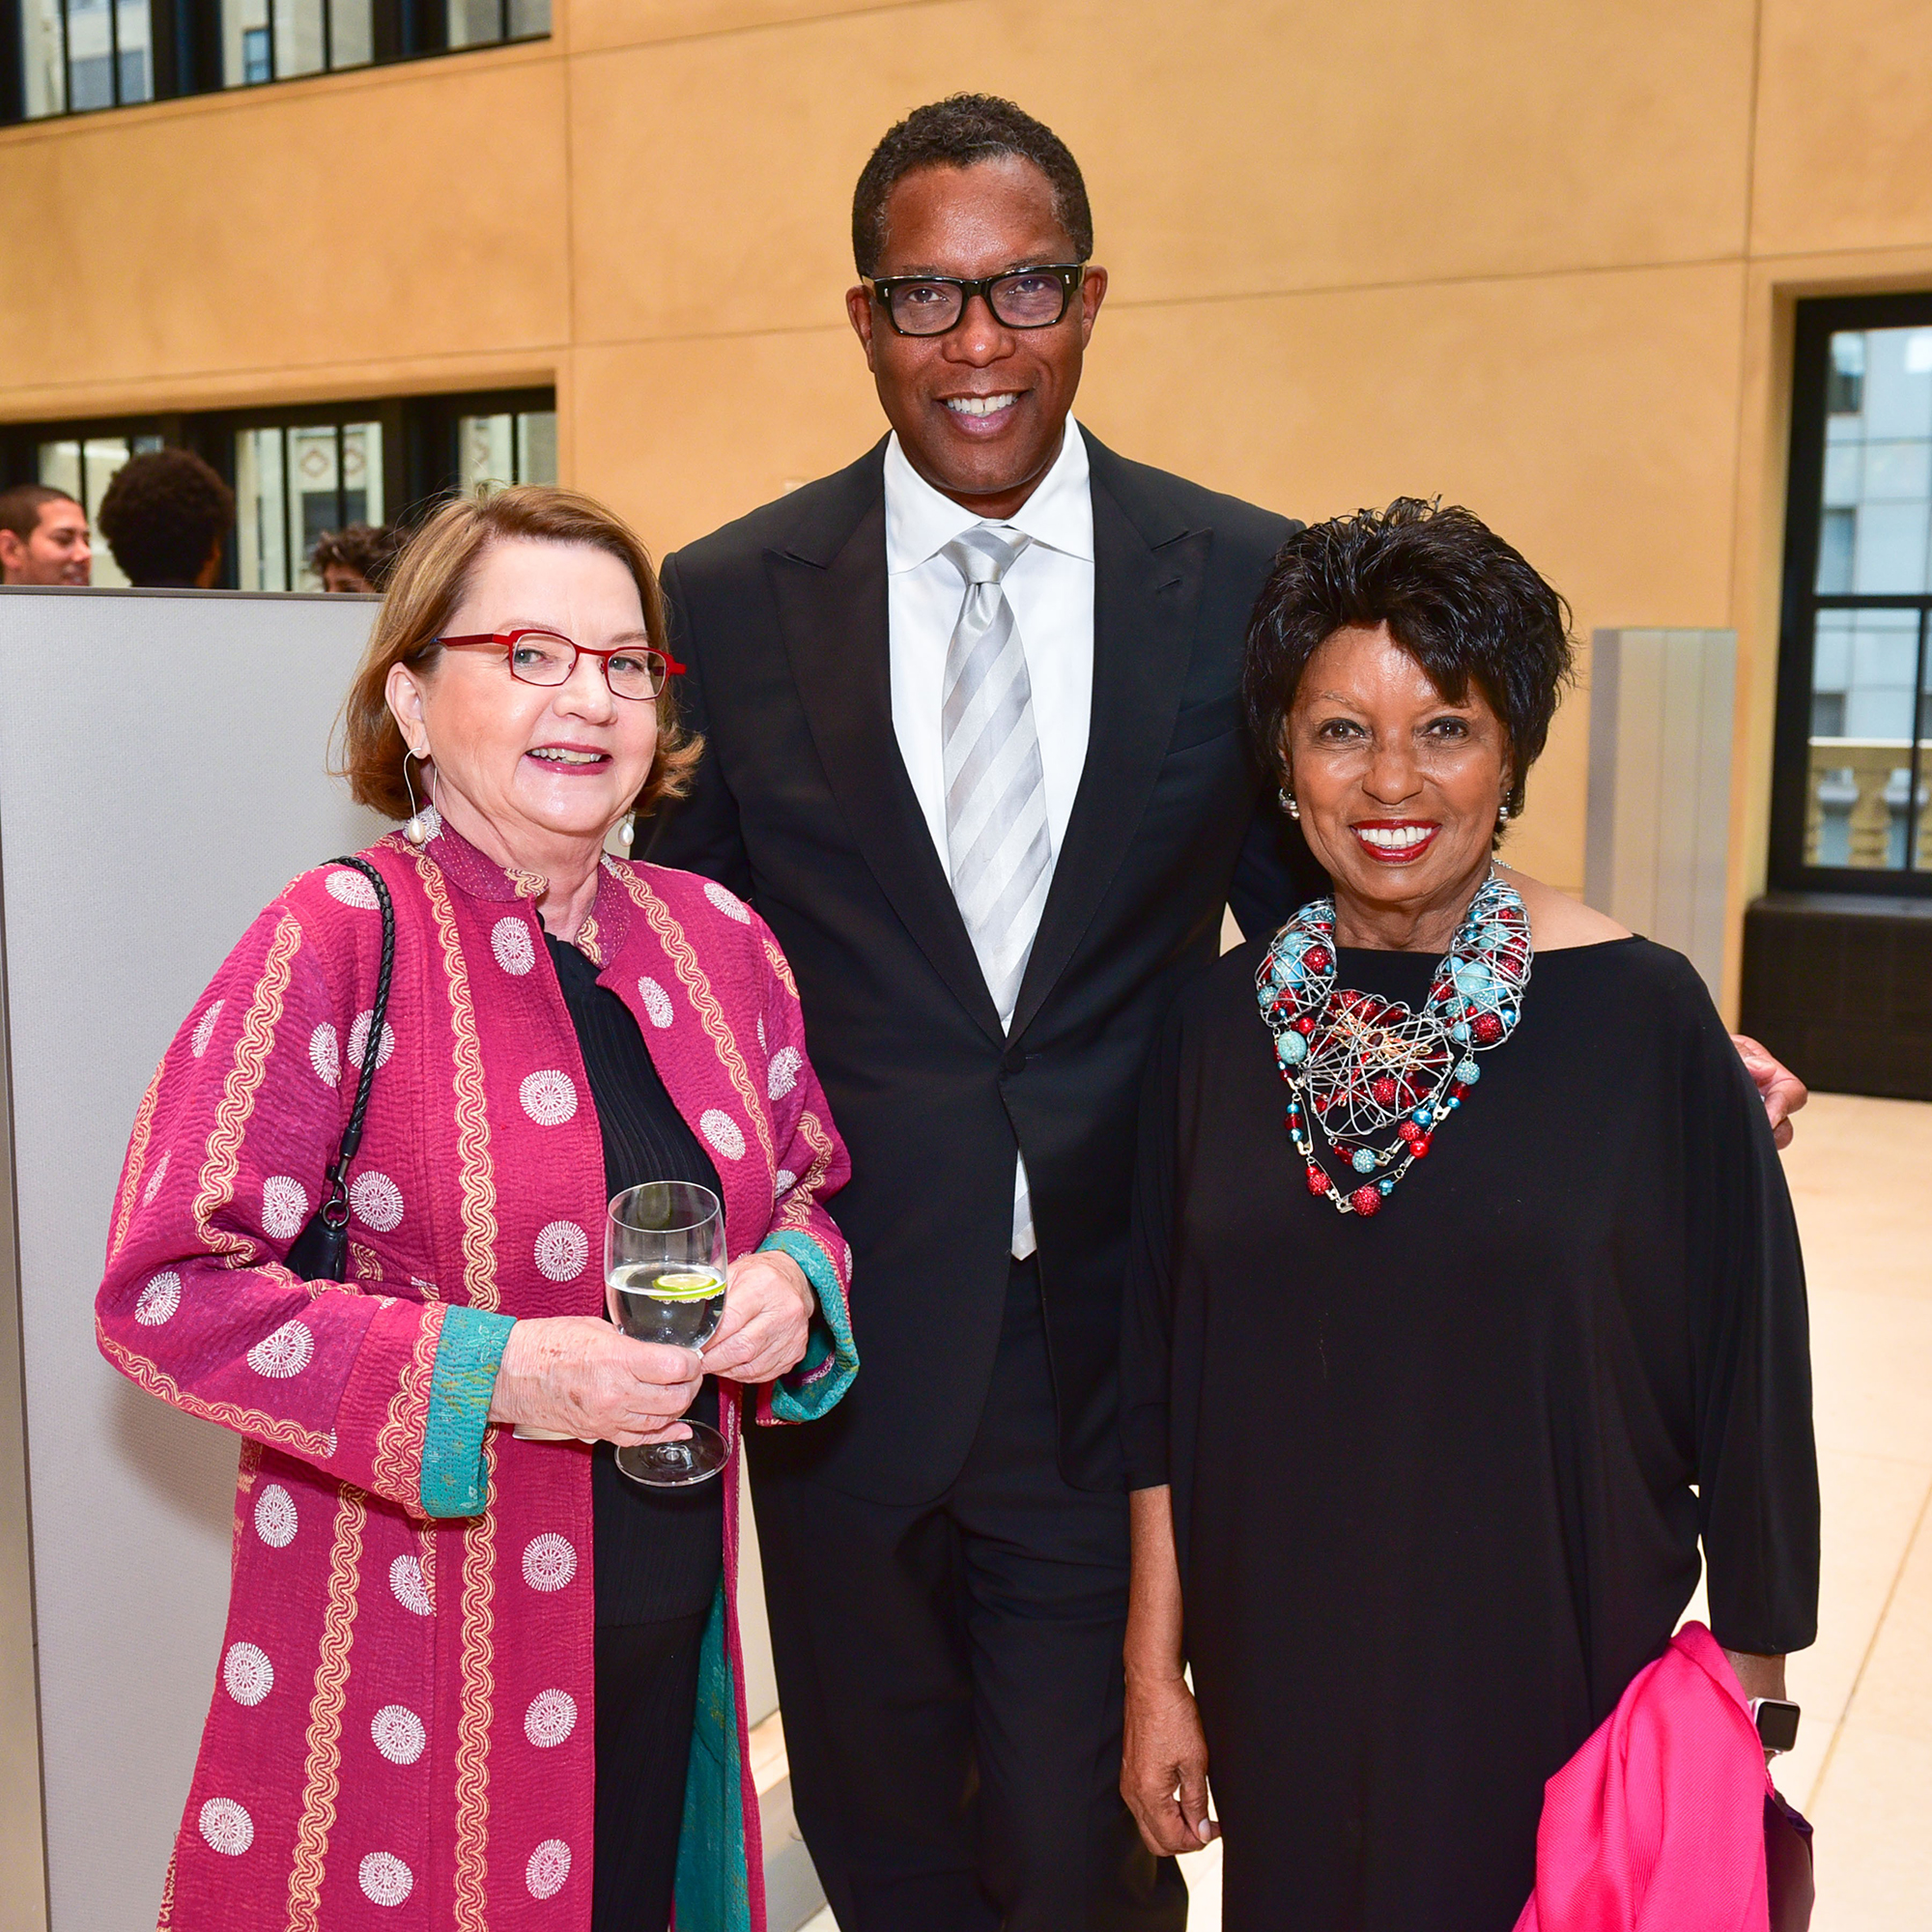 Kay Coates, Clyde Jones, and Nancy Lane at the Abstracted Black Tie Dinner Hosted by Pamela Joyner & Fred Giuffrida. Sean Zanni, © Patrick McMullan.